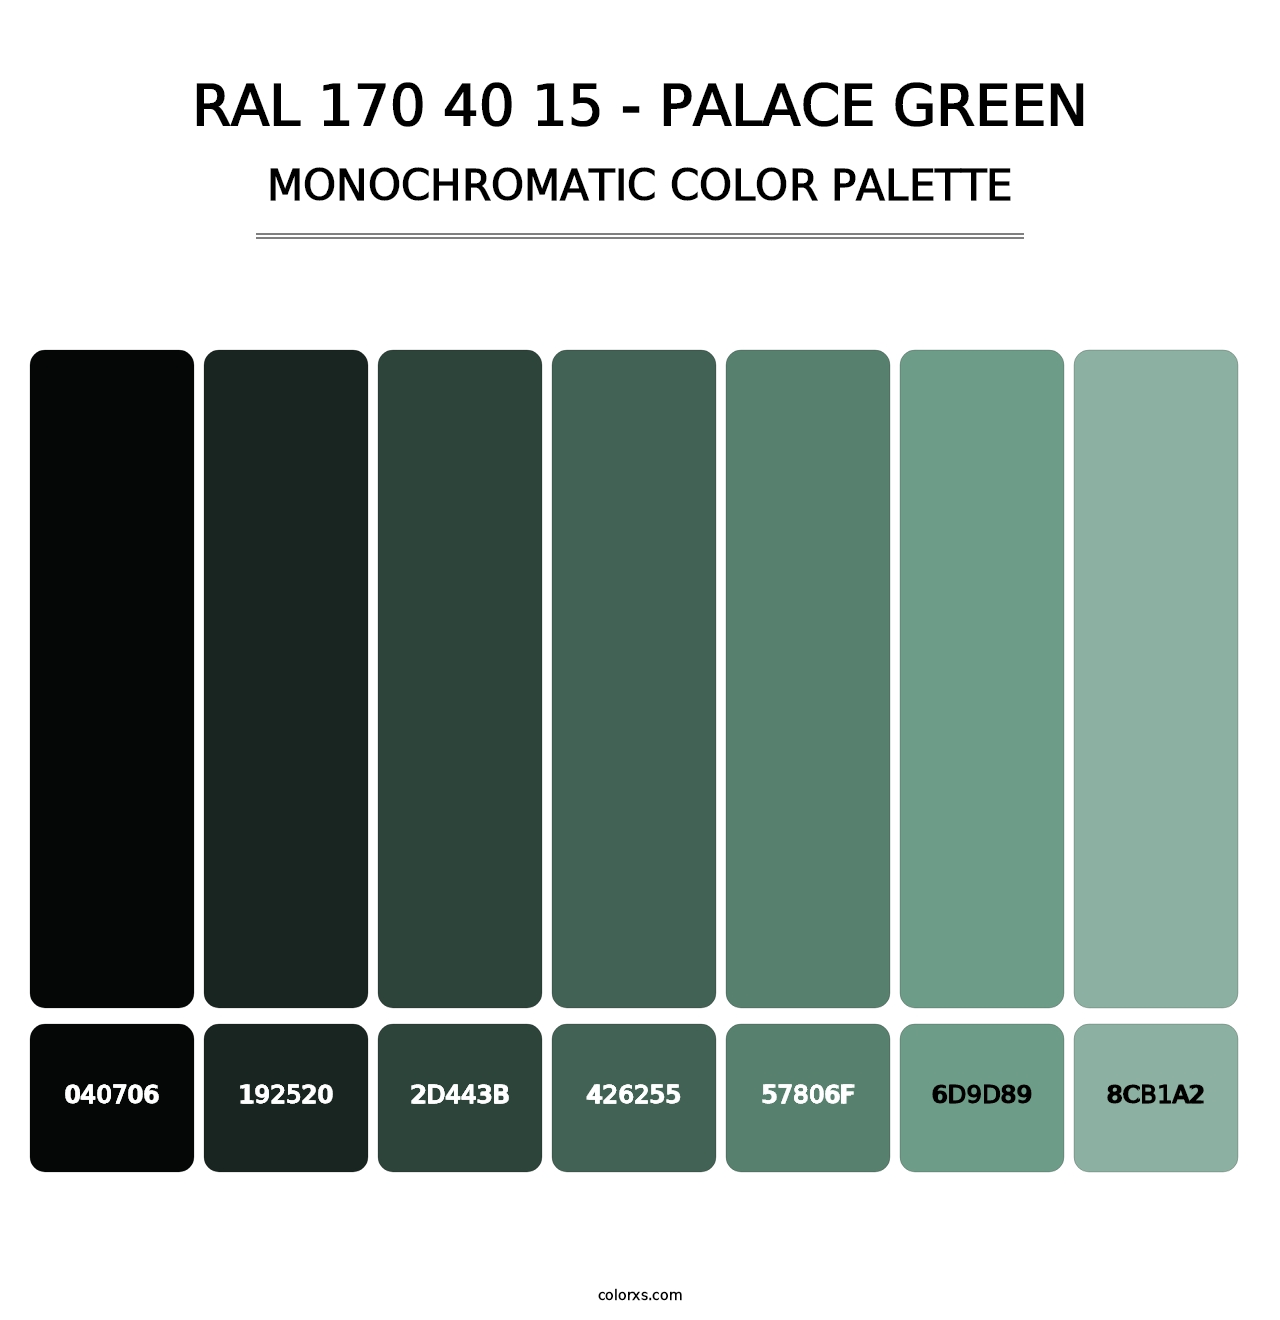 RAL 170 40 15 - Palace Green - Monochromatic Color Palette